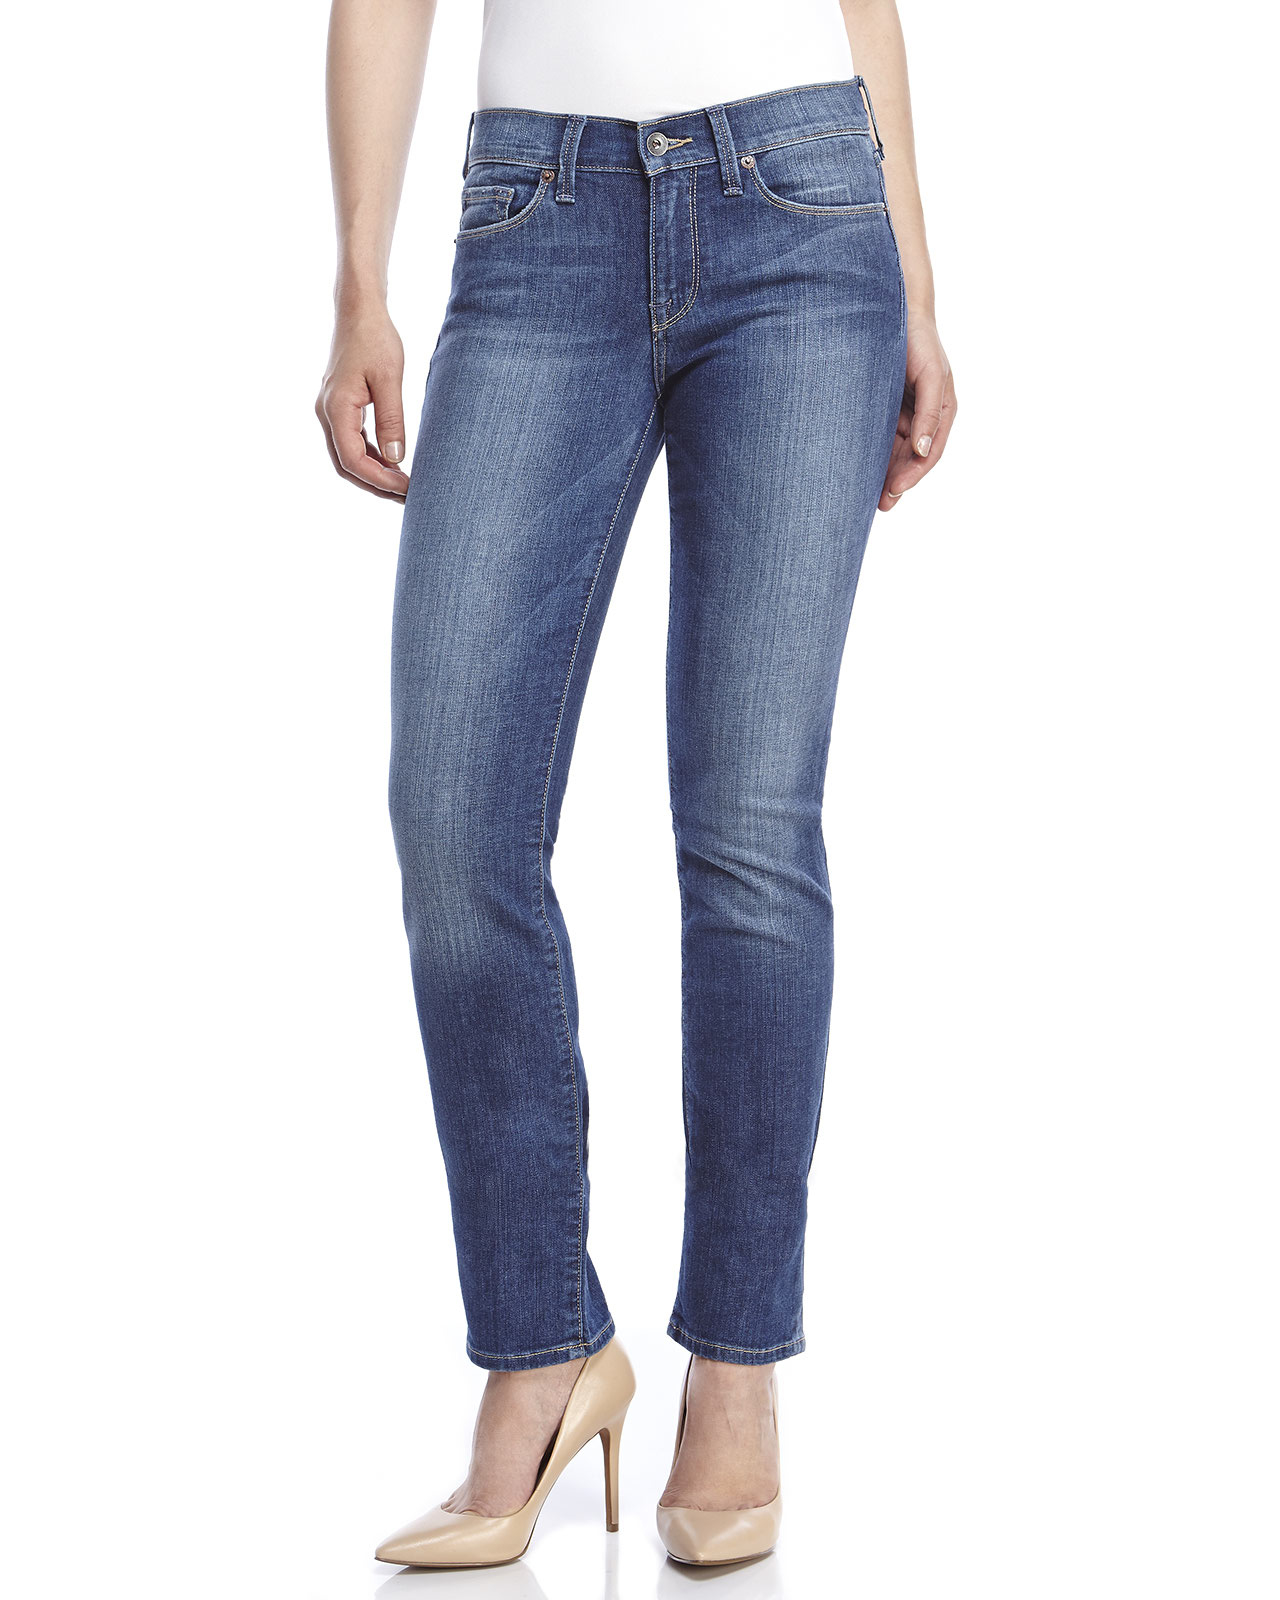 Lyst - Lucky brand Sofia Straight Leg Jeans in Blue